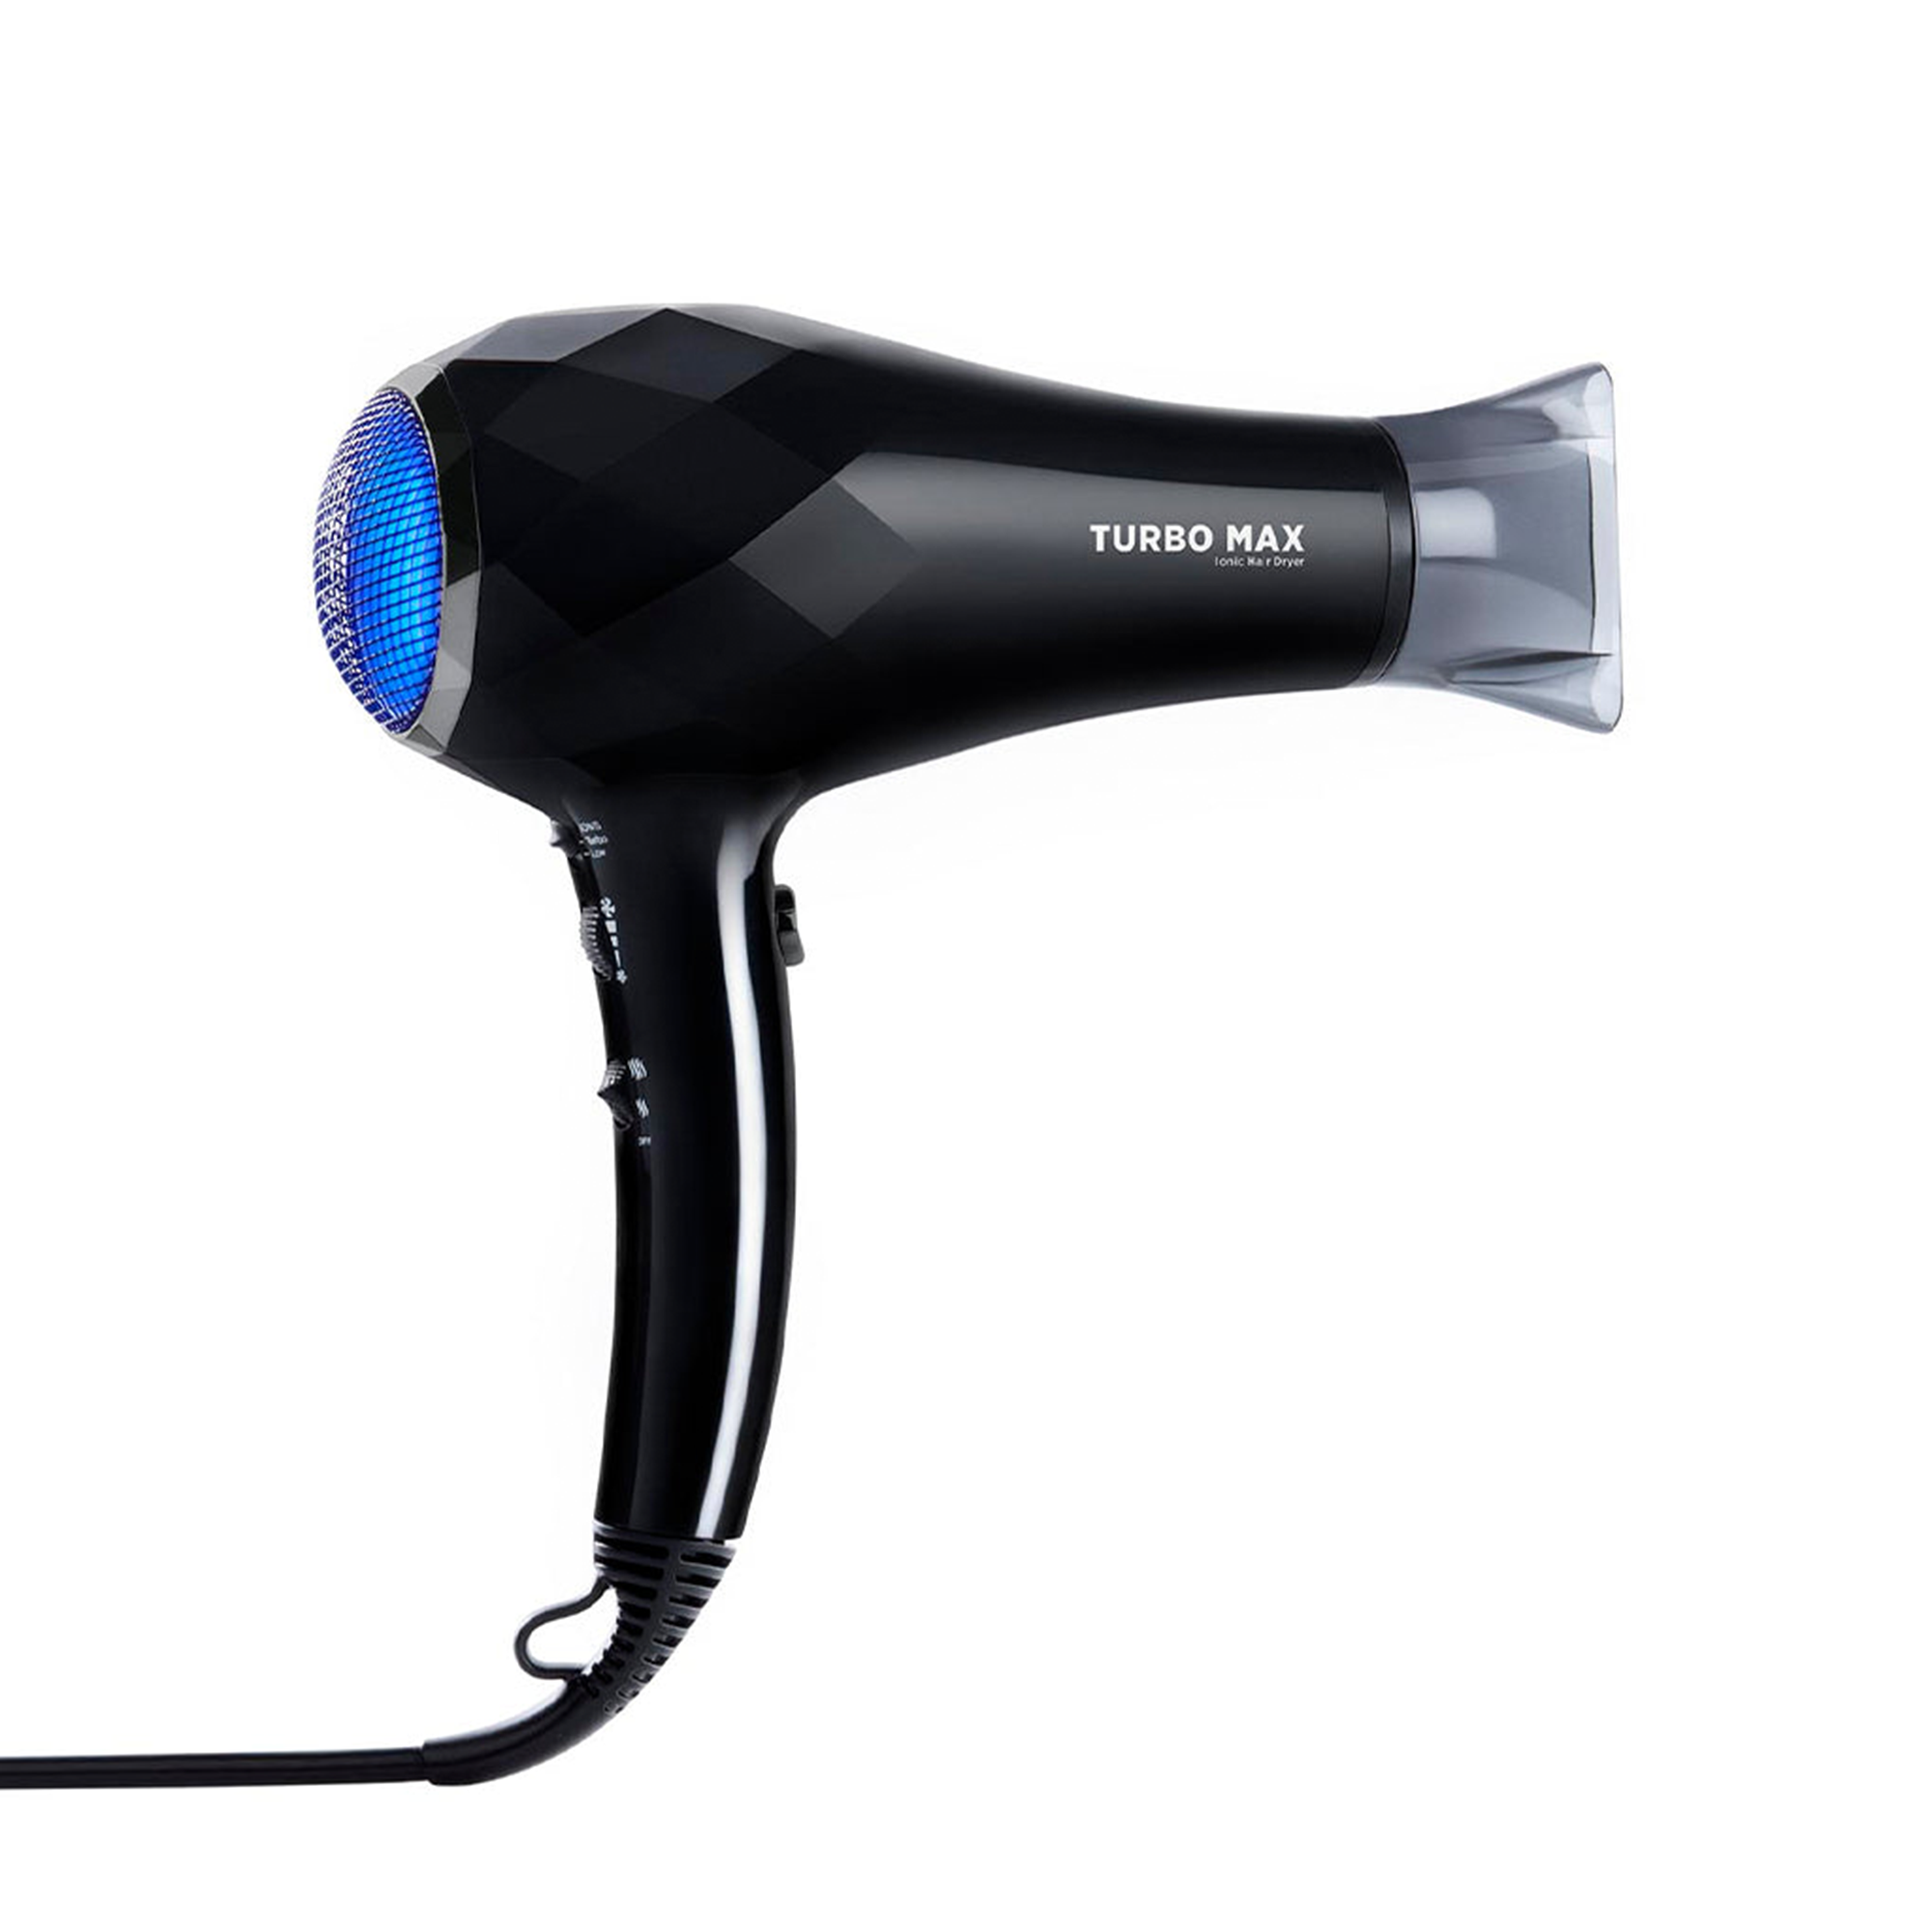 Turbo Max Ionic Dryer by InStyler